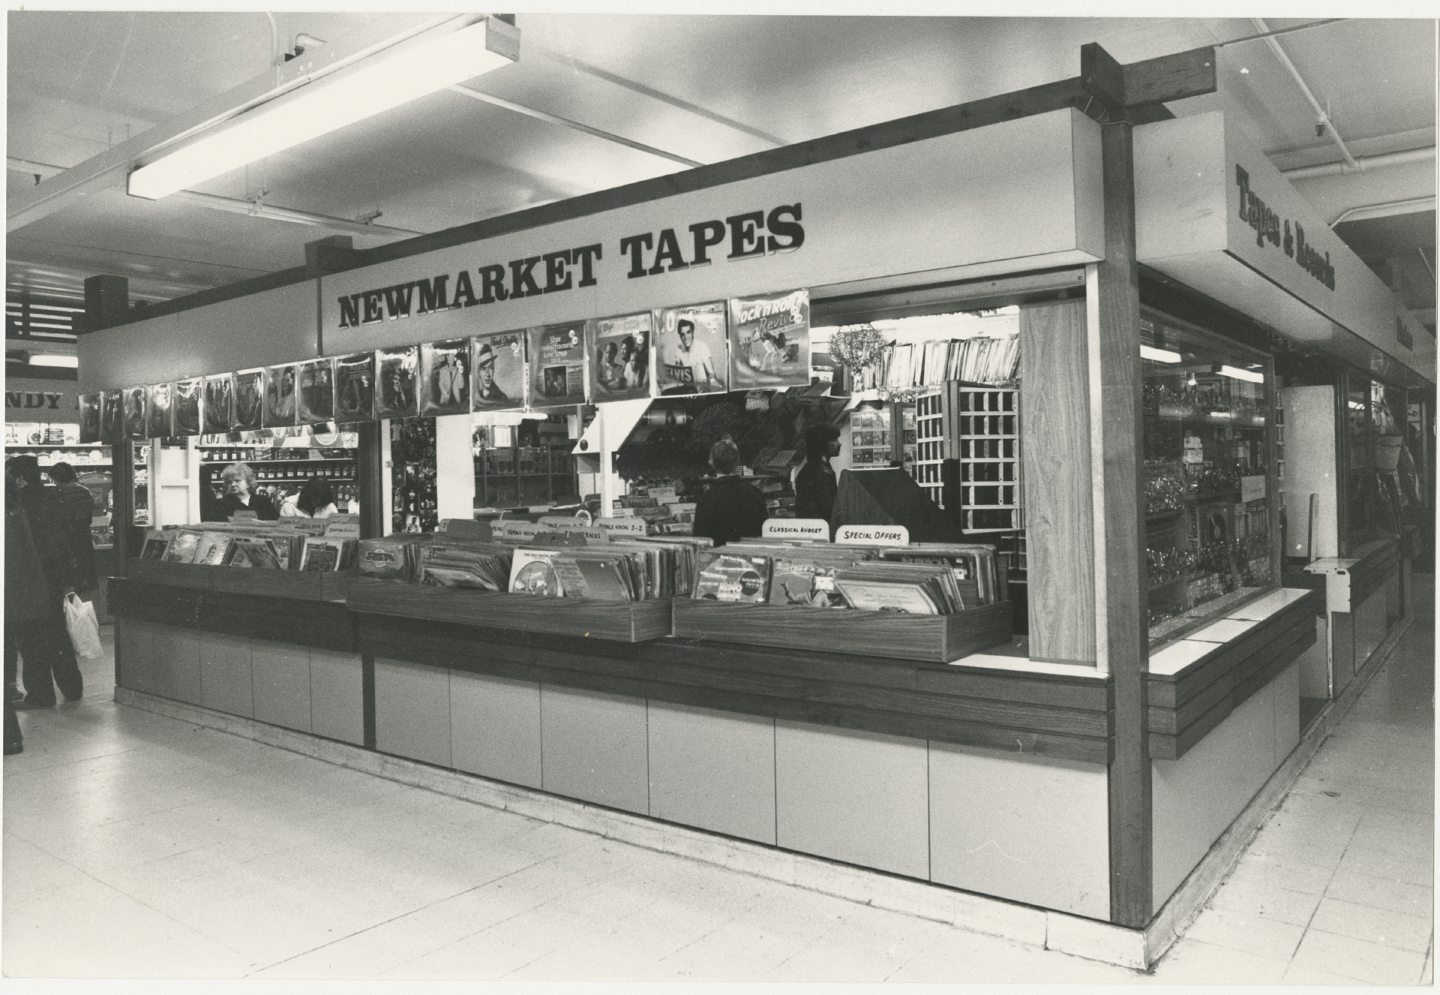 New Market tapes pictured in 1981.